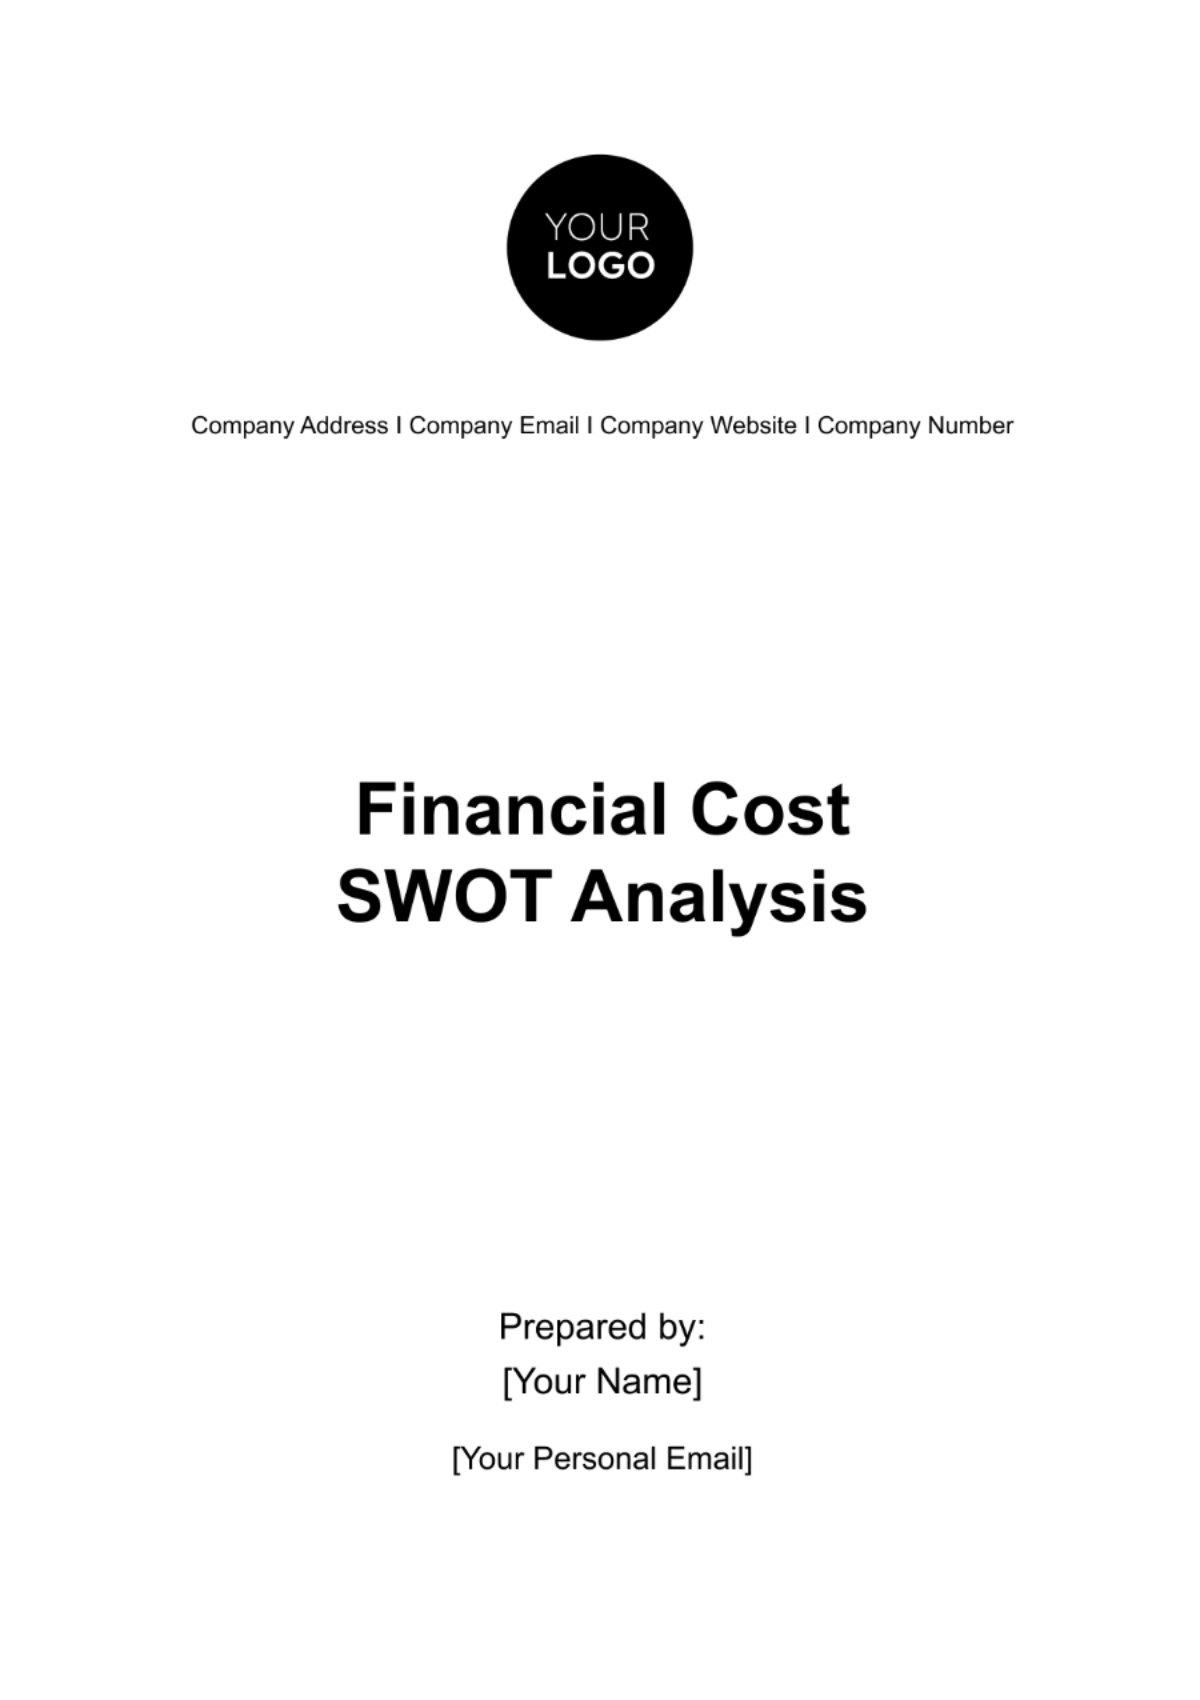 Financial Cost SWOT Analysis Template